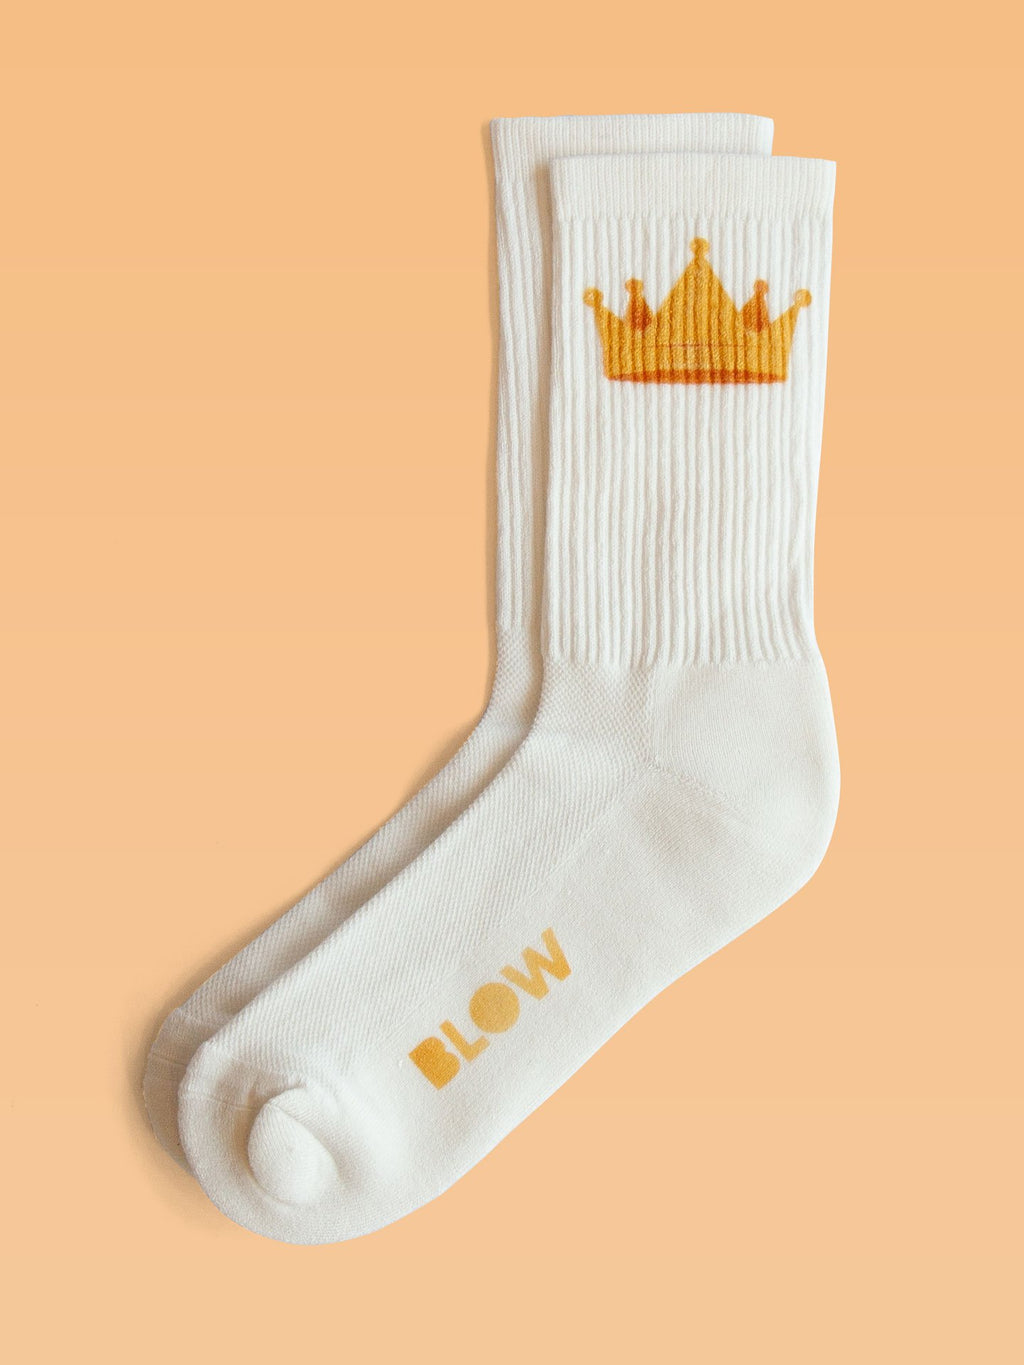 THE KING - Organic cotton crew socks with bamboo - BLOW London